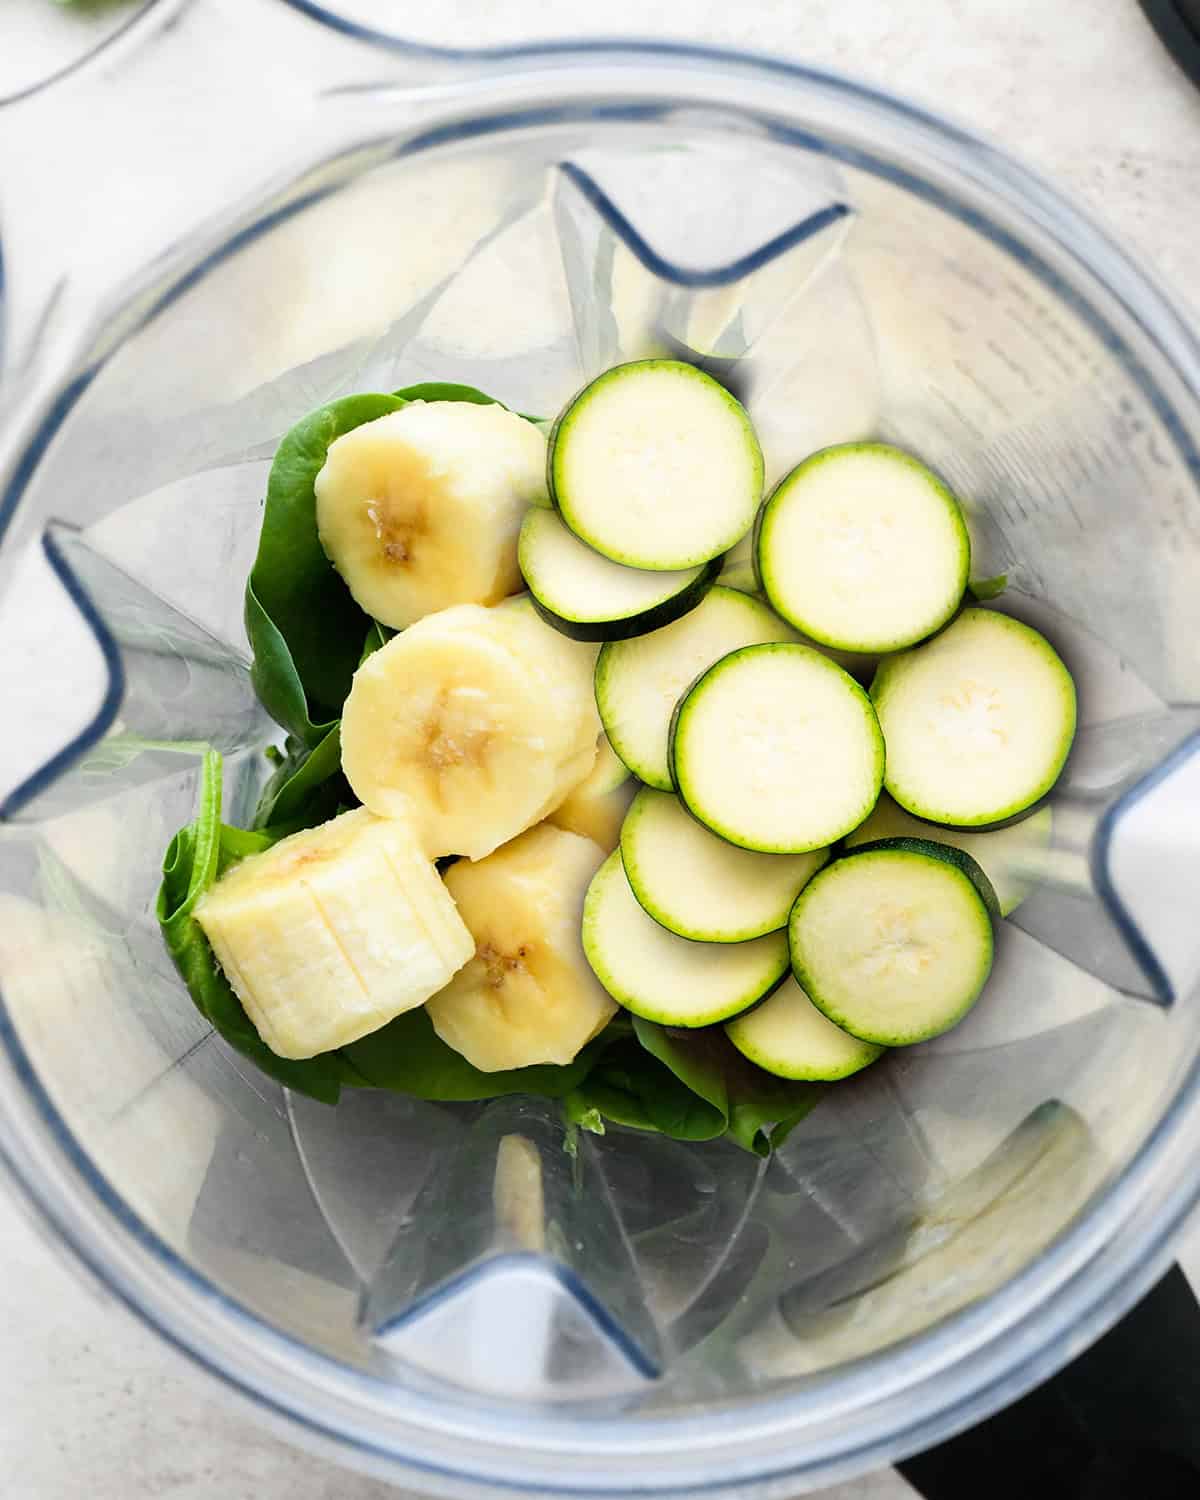 How to Make a Zucchini Smoothie - ingredients in a blender before blending